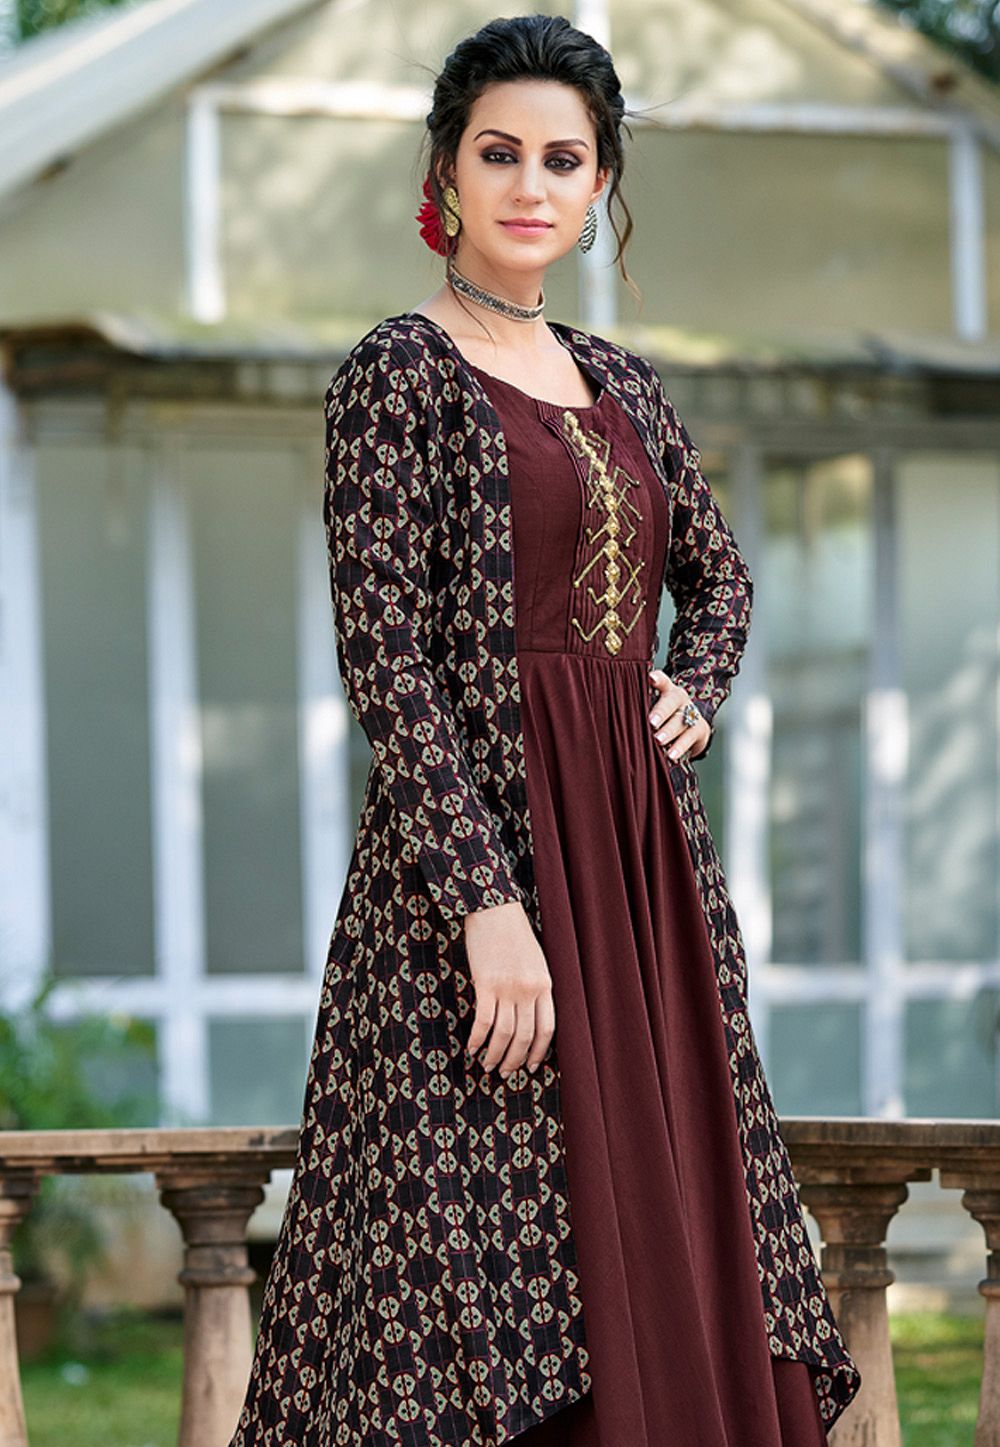 Jacket Maxi Dress For Female in Dandeli at best price by Holakart - Justdial